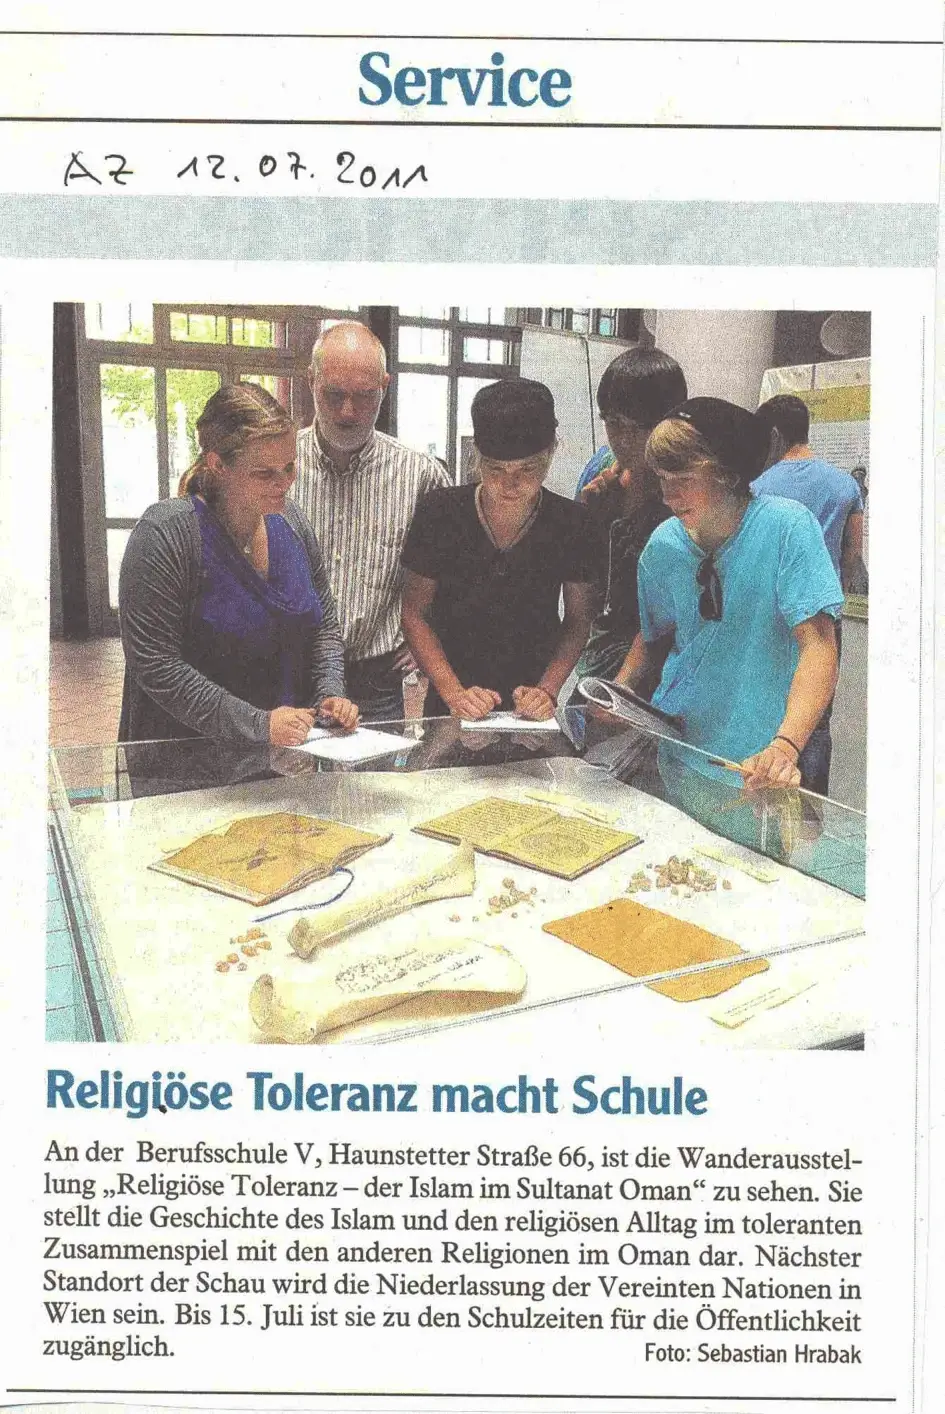 Article (in German) about the Exhibitions in Germany - 2011